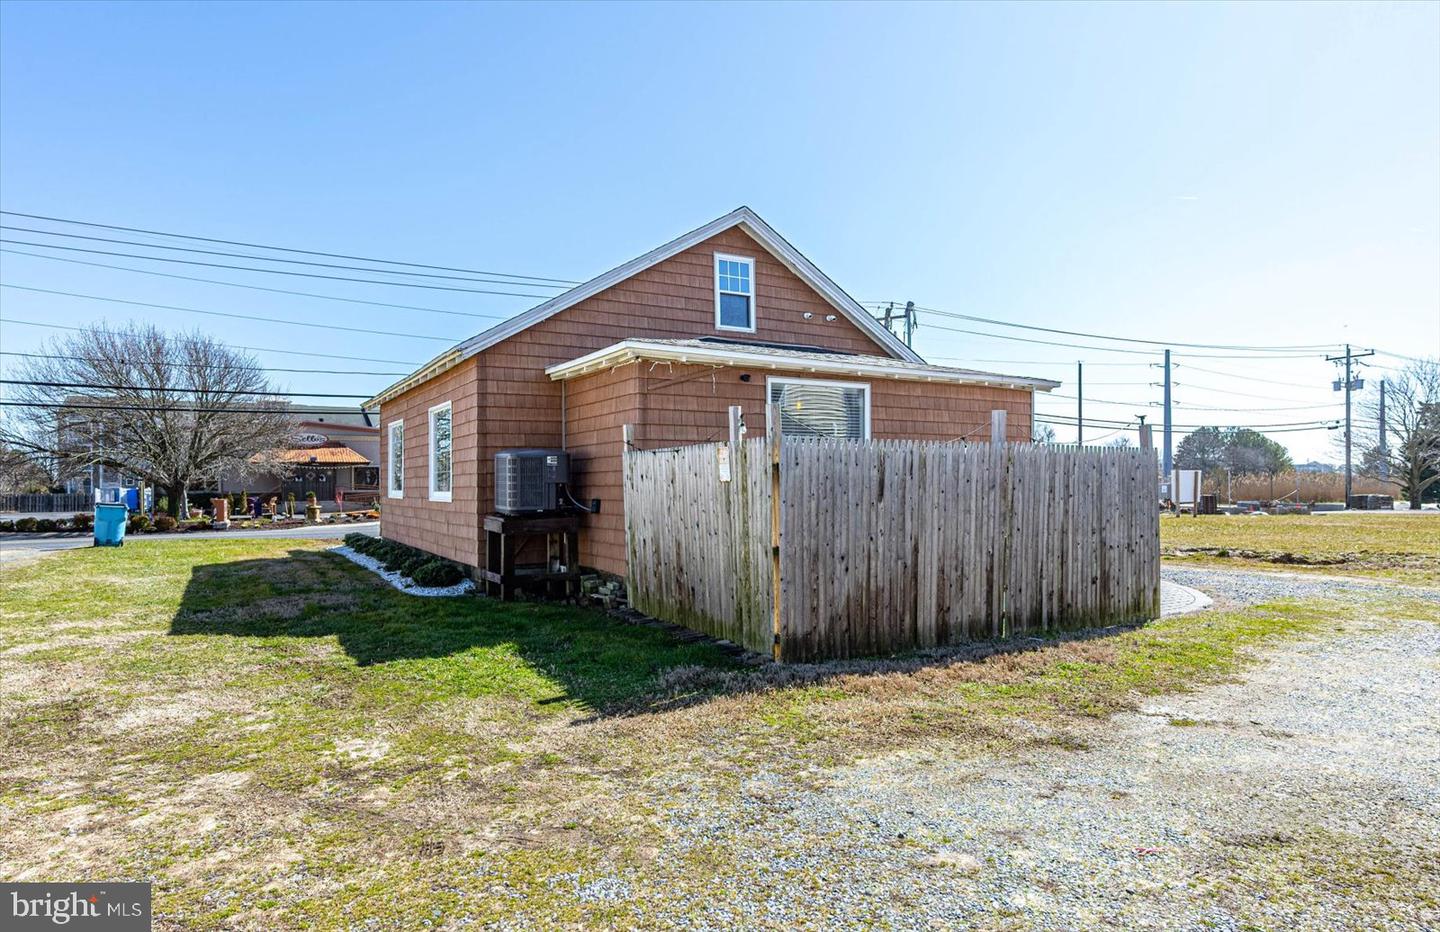 MDWO2019110-802902587364-2024-03-05-14-03-43 9801/9805 Golf Course Rd | Ocean City, MD Real Estate For Sale | MLS# Mdwo2019110  - 1st Choice Properties